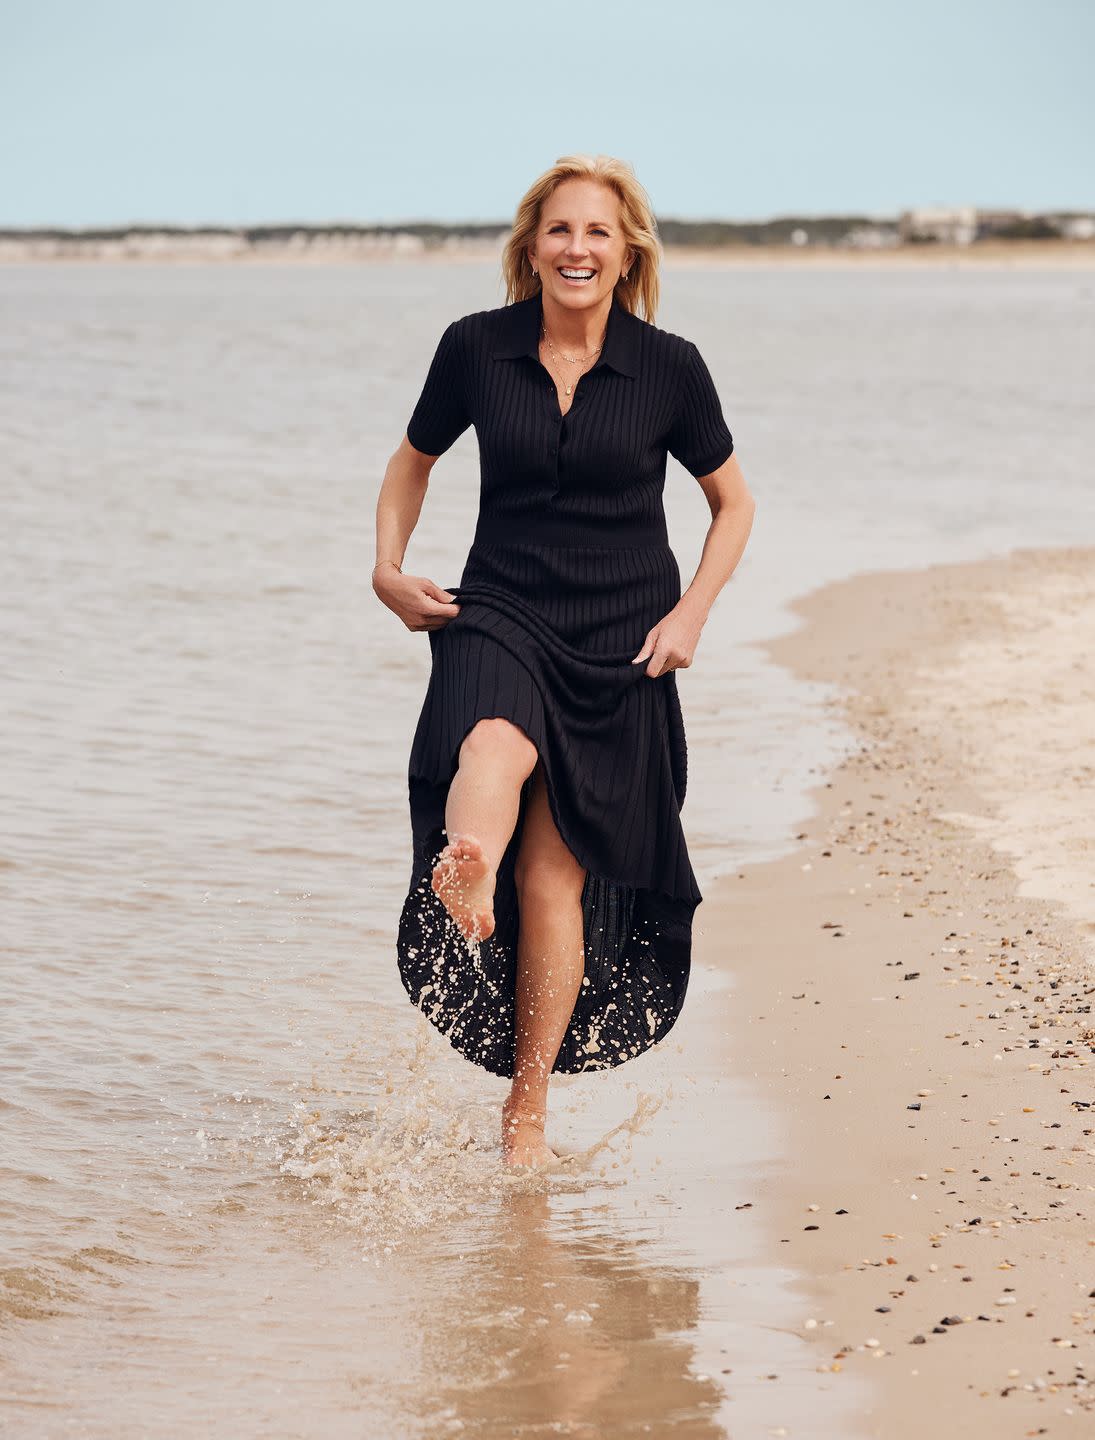 first lady jill biden in a black dress on the beach, kicking up water from the tide, smiling at the camera